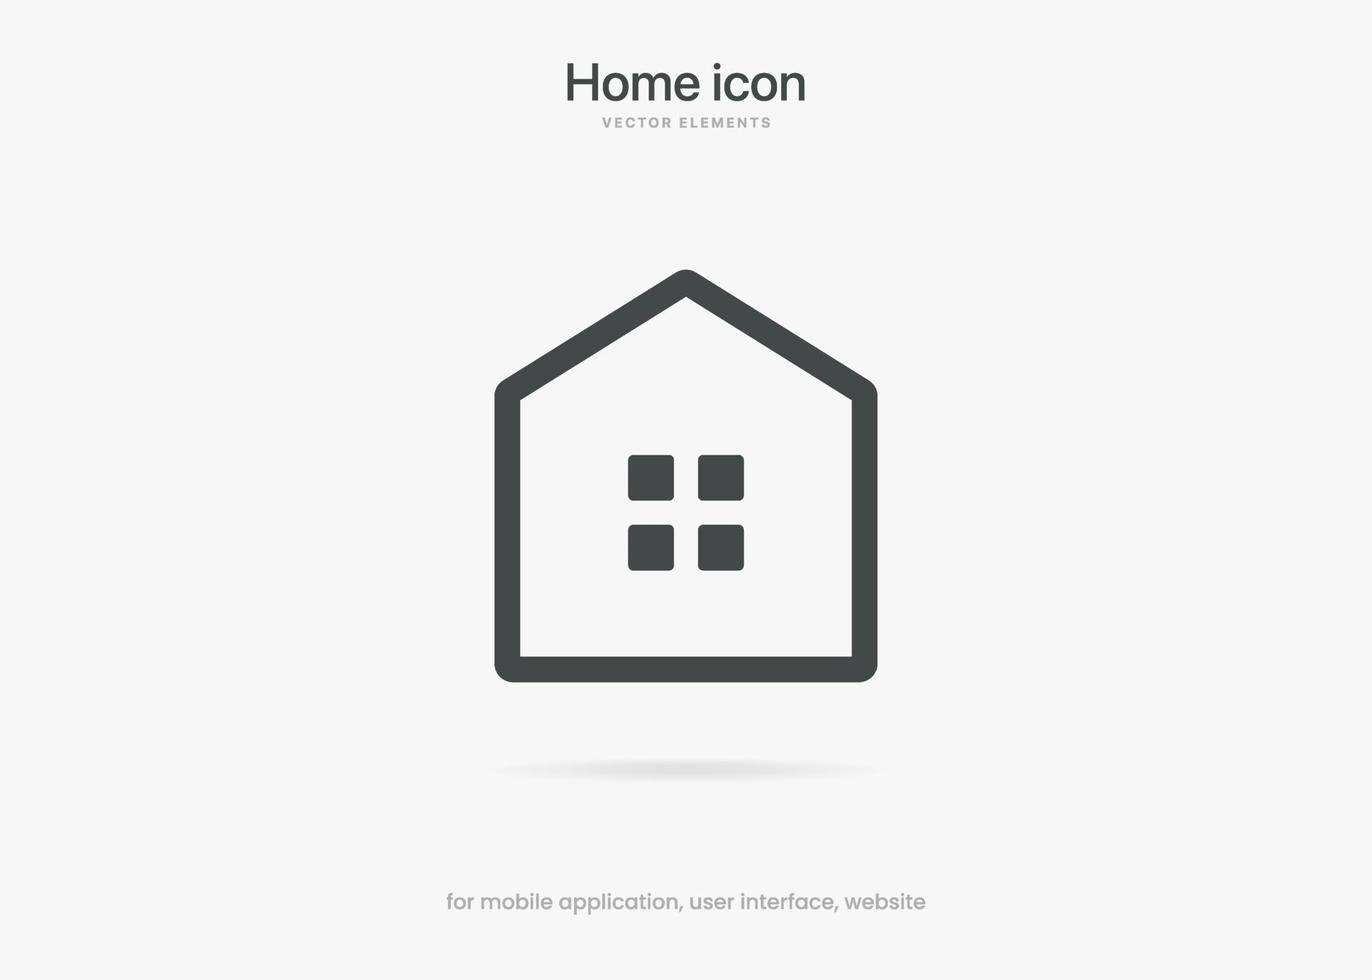 Minimal modern home, homepage, base, main page, house push button icon emblem symbol, sign. 3d blue home icon. Mobile app icons. Device UI UX mockup. Isolated vector elements.